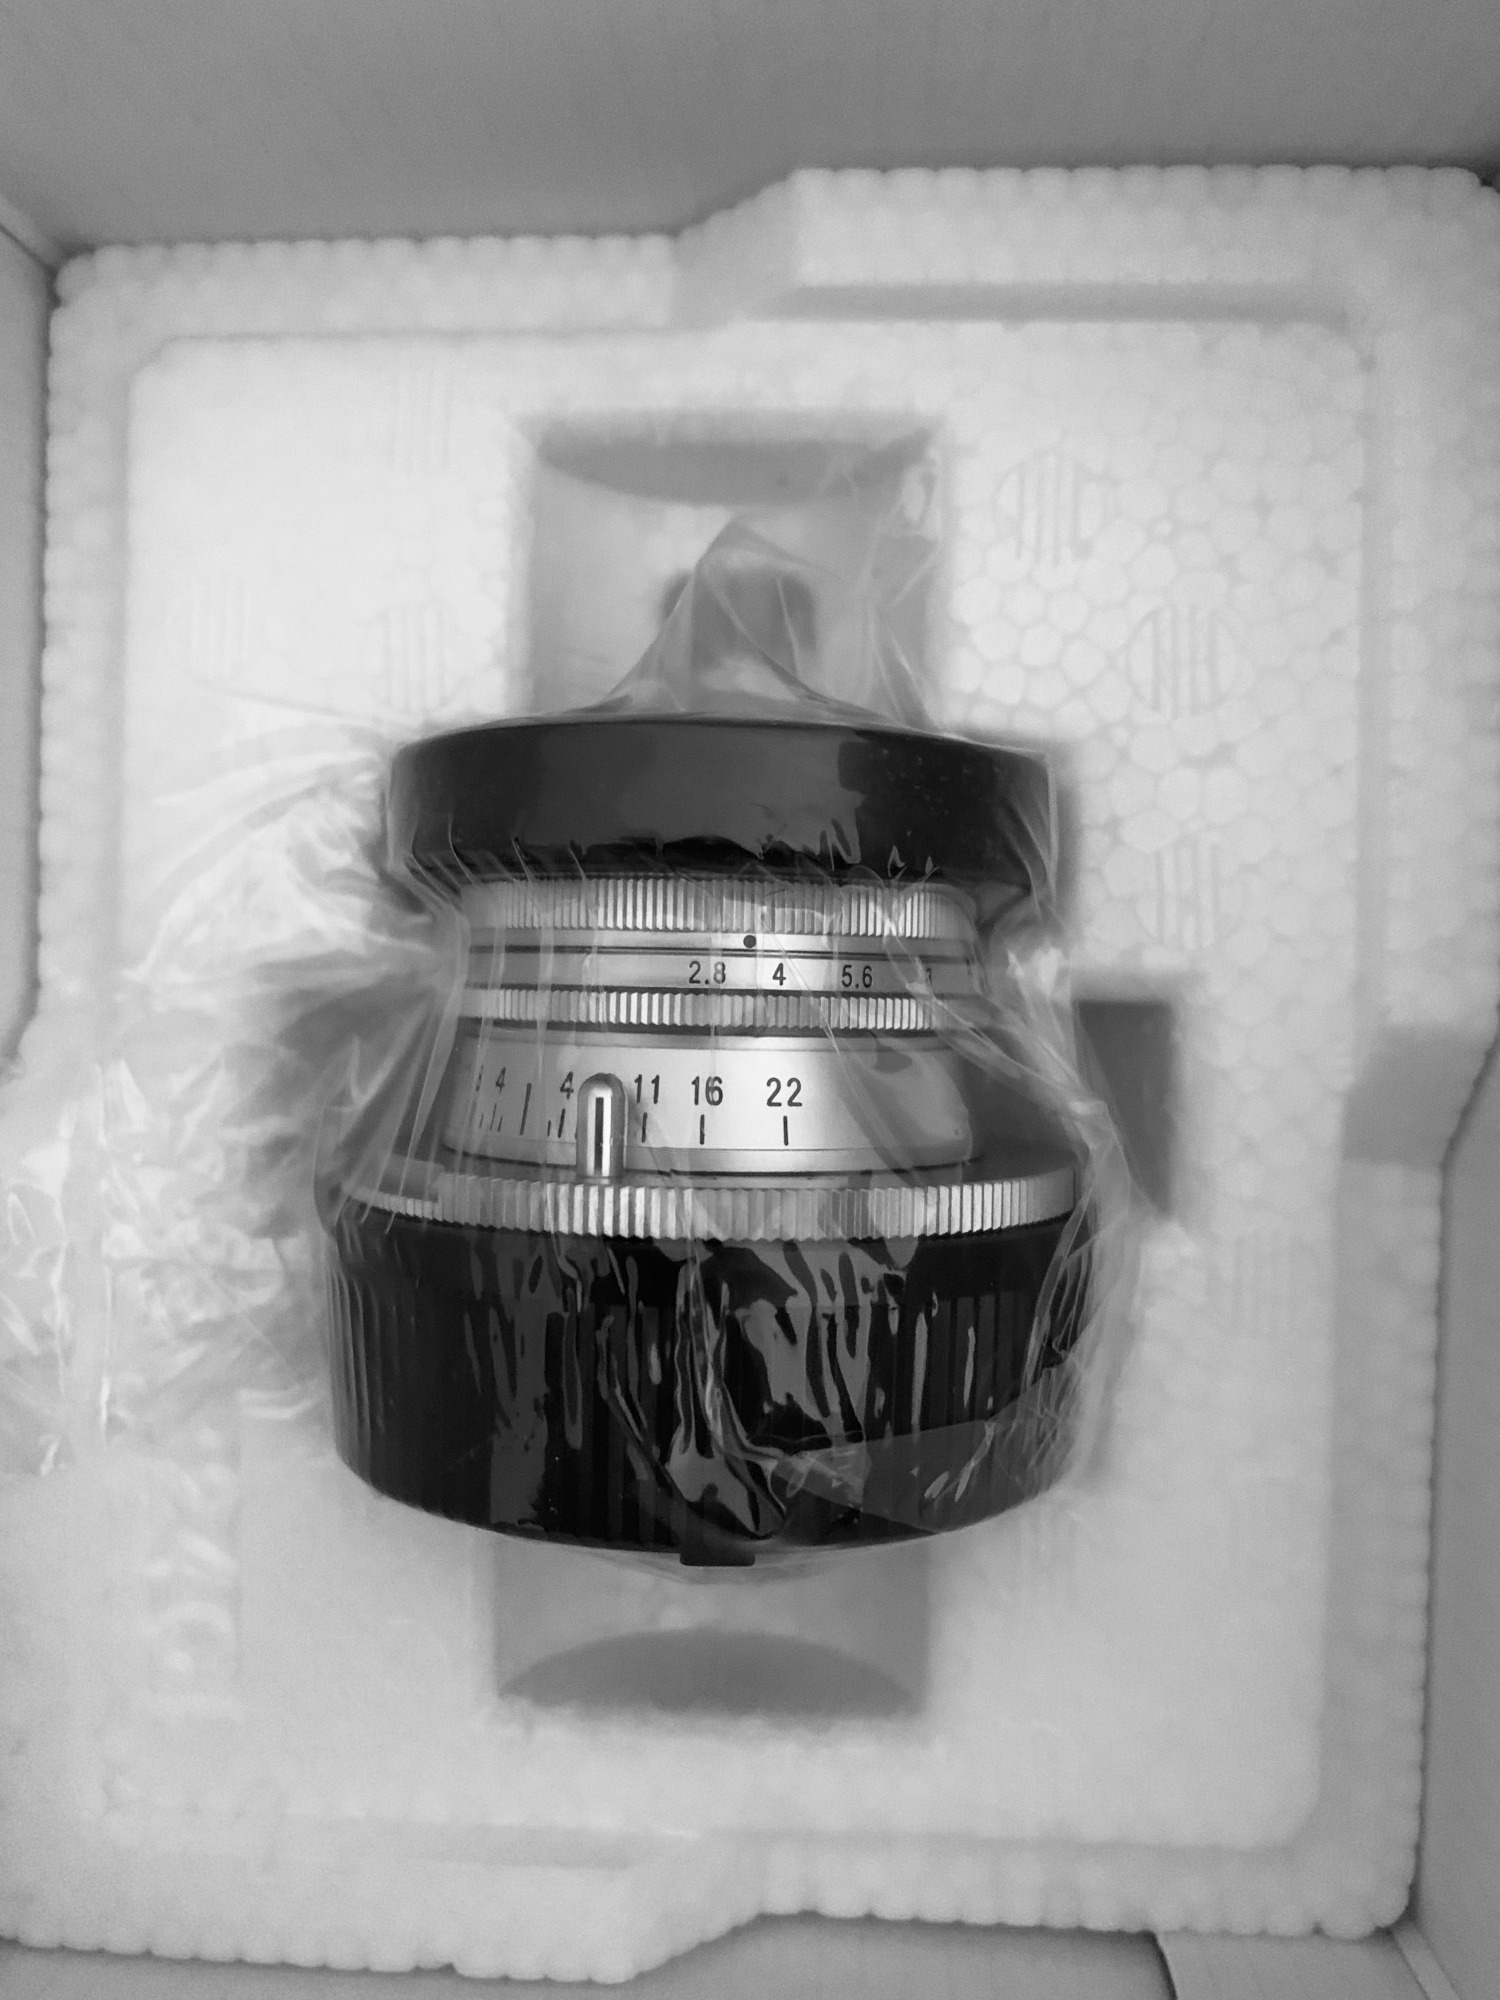 Voigtländer Heliar 40 MM f/2.8 inside its box. You can see how well protected it is.